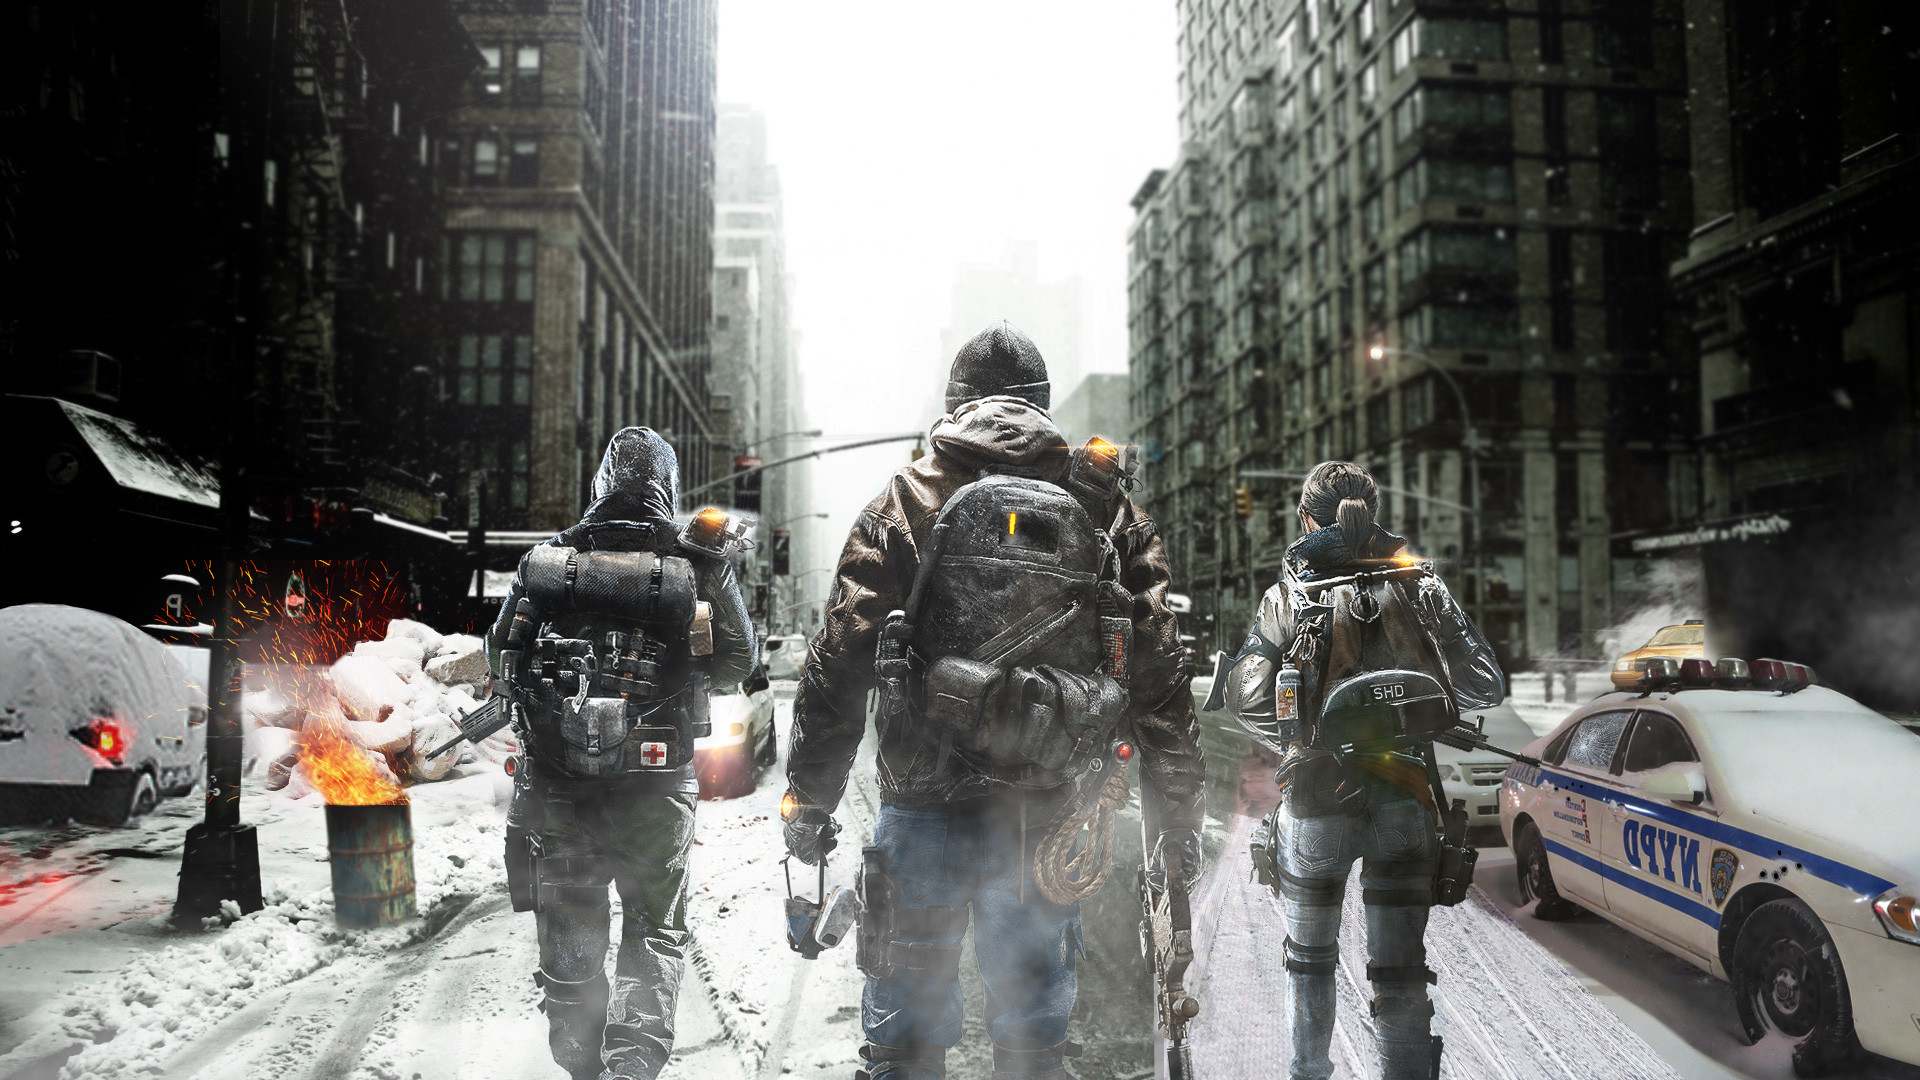 1920x1080 Tom Clancy's The Division Wallpaper